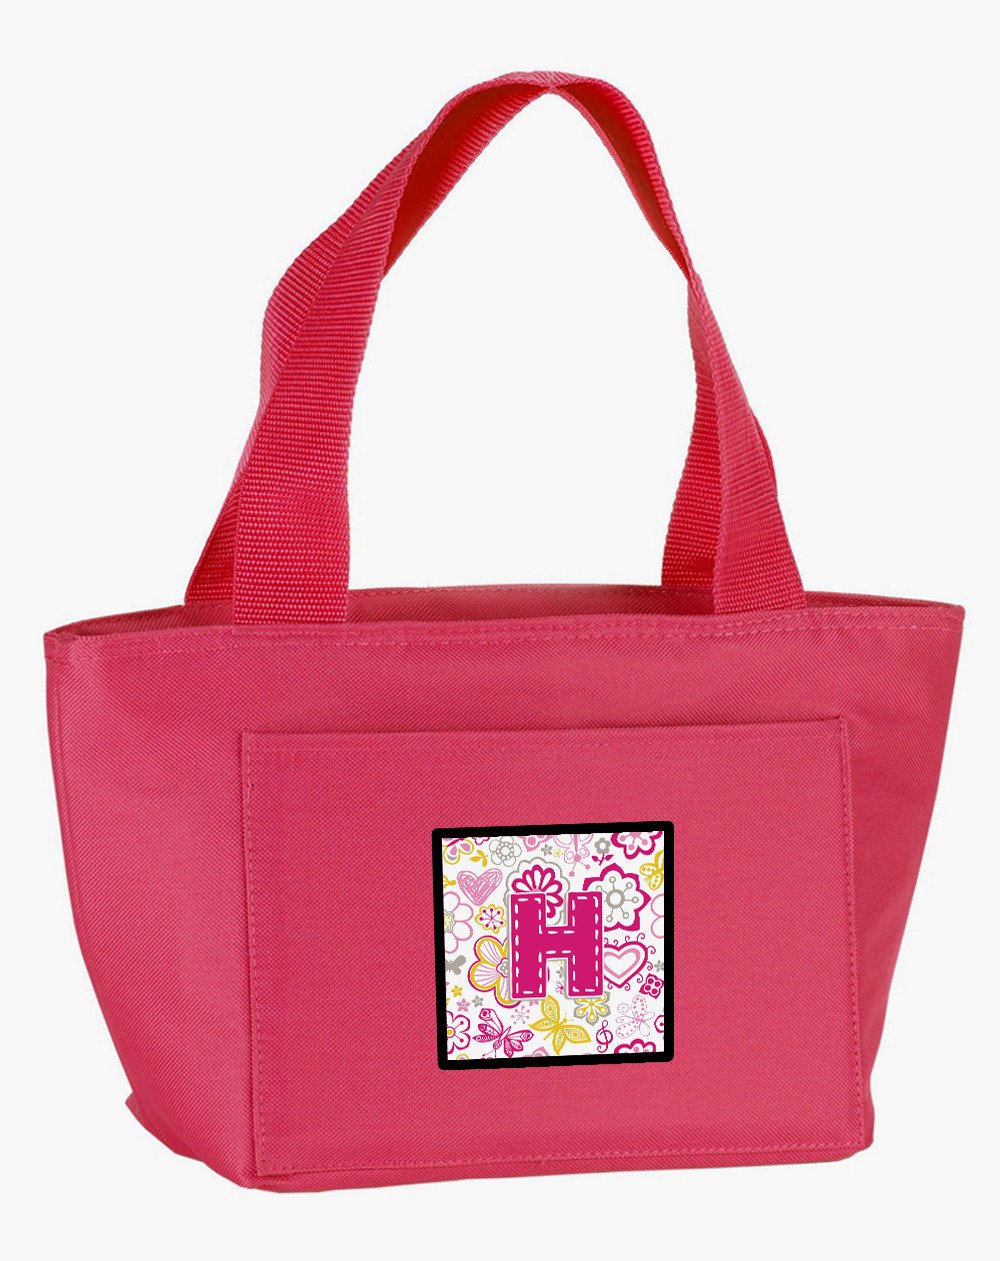 Letter H Flowers and Butterflies Pink Lunch Bag CJ2005-HPK-8808 by Caroline's Treasures